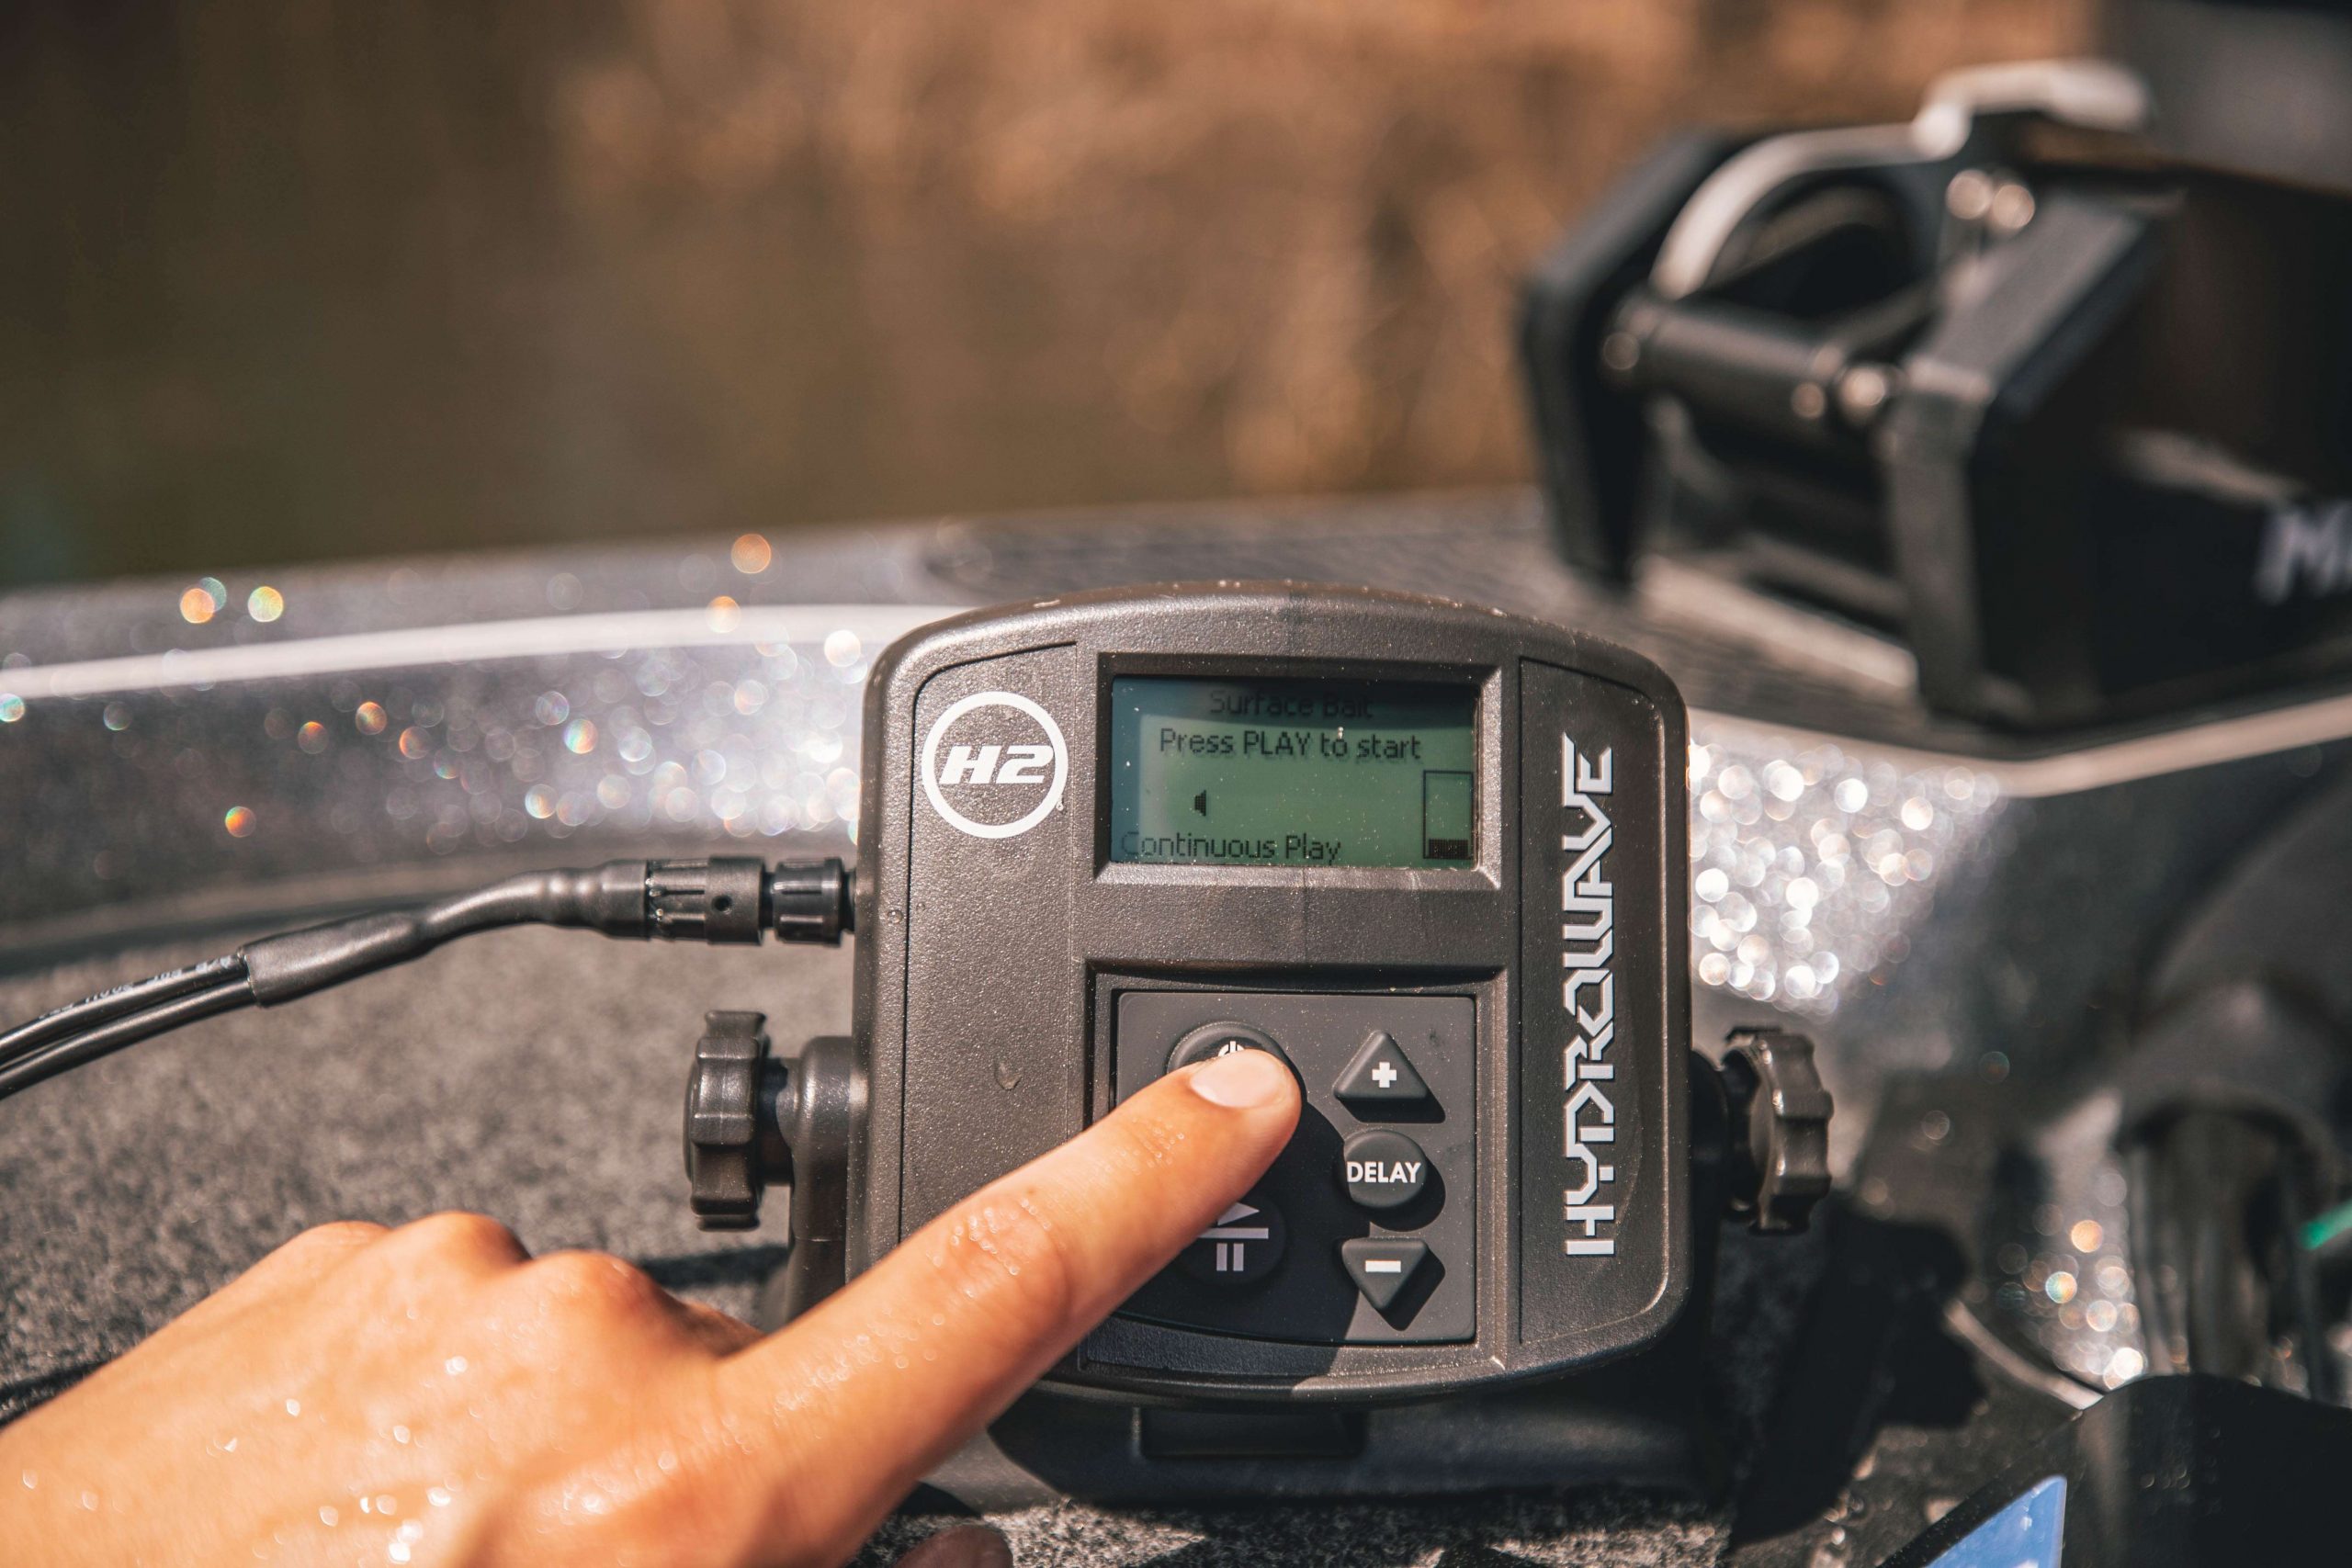 <h4>HYDROWAVE Fish Feeding Stimulator</h4>
 Whether you are in it to win it in tournaments or you want to make the most of every cast, the HYDROWAVE can help you catch more fish. When you find pockets of fish and present them with the right bait, HYDROWAVE can help you appeal to a fishâs predatory instincts with sound and vibration, igniting a feeding frenzy.
<BR><BR>
<a href=